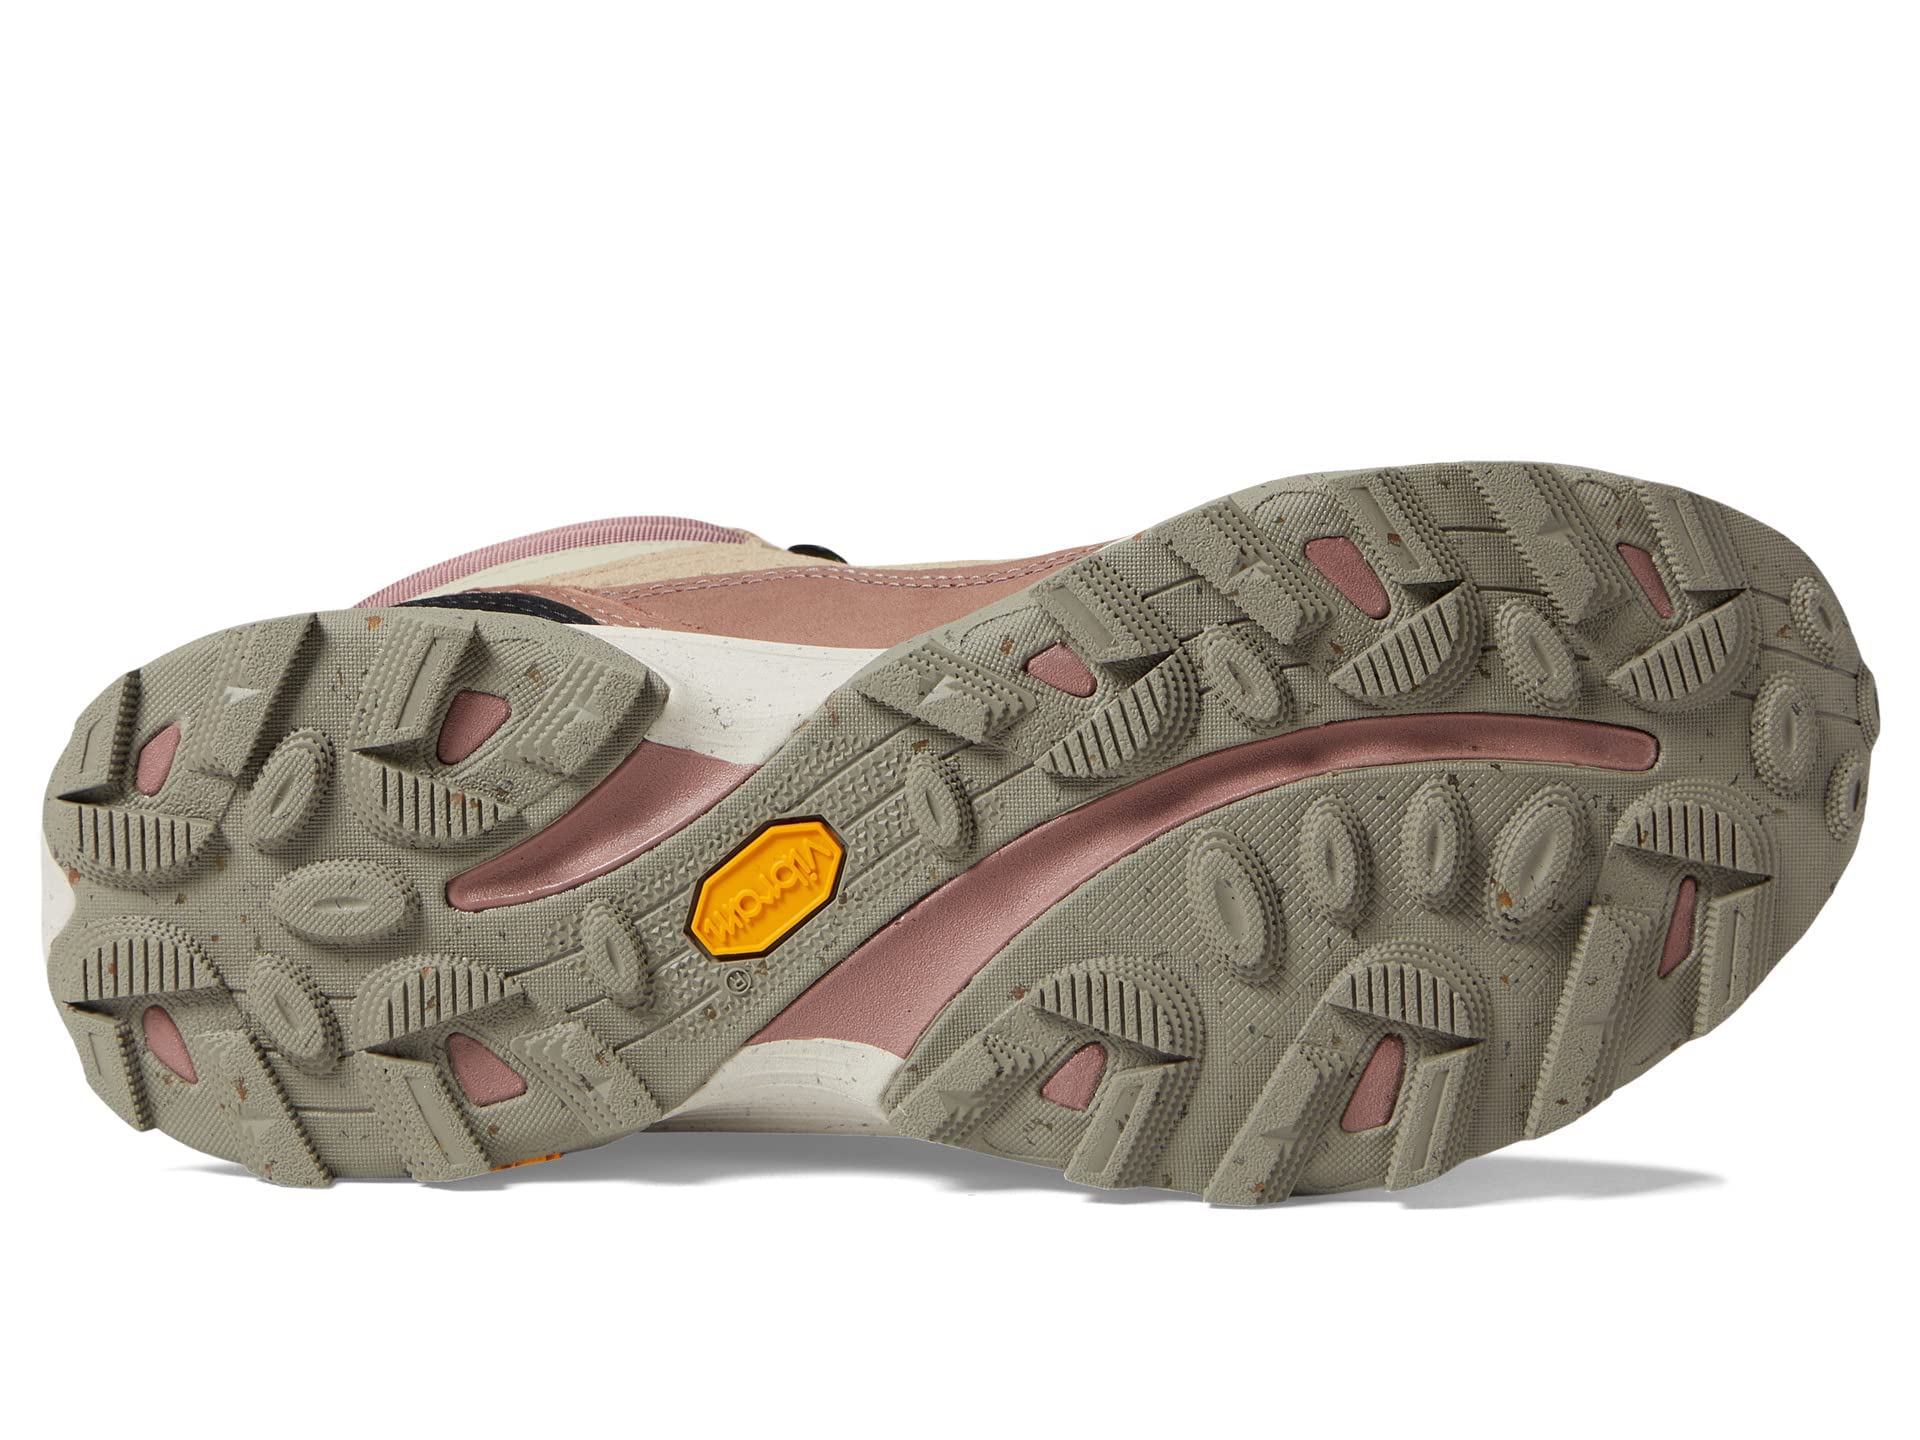 Merrell Speed Solo Mid WP Sneakers for Women - Waterproof Membrane with Hell Pull Tabs, Rugged Street Style Sneakers